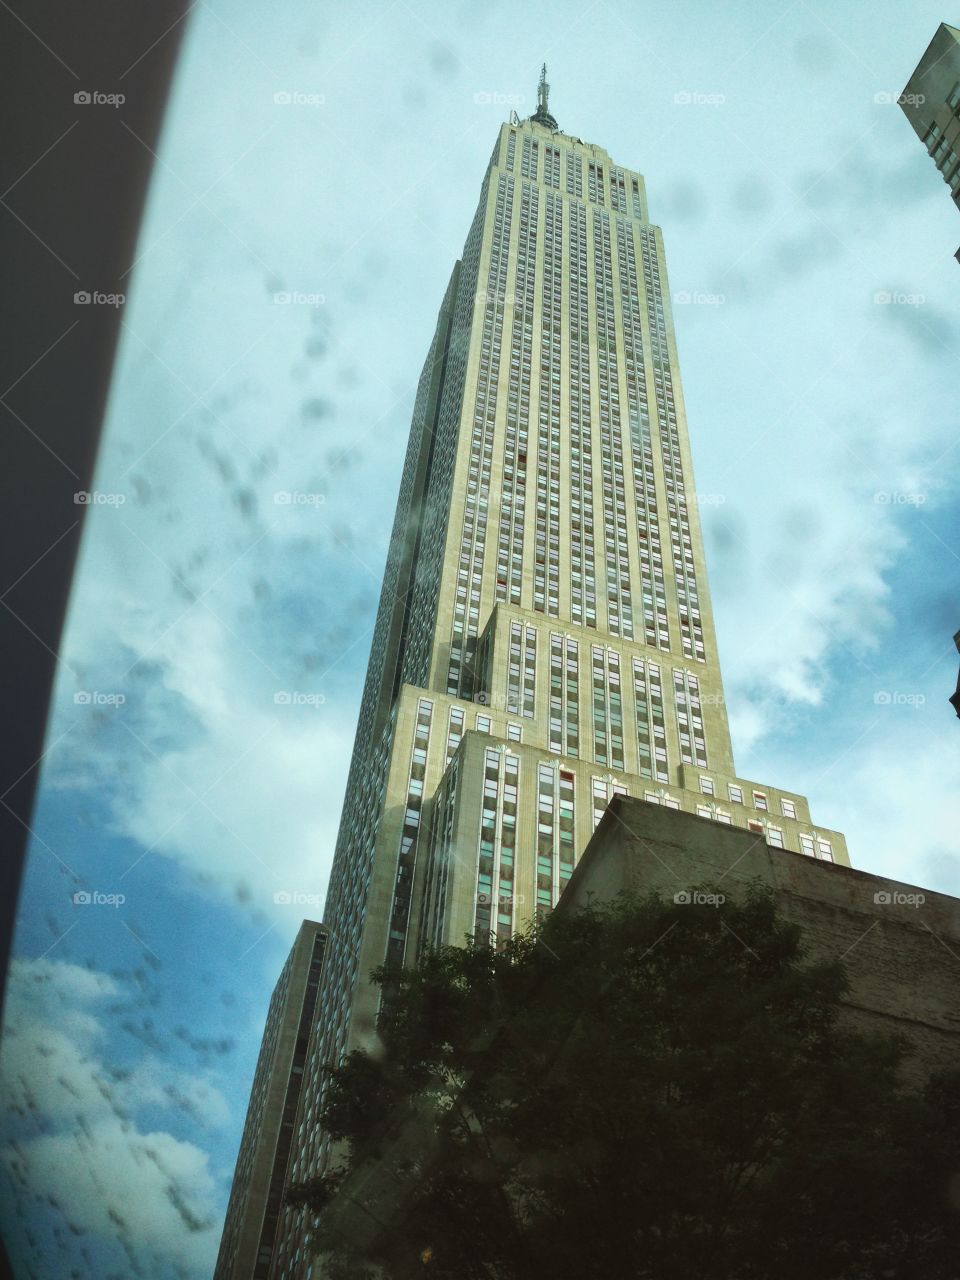 EMPIRE STATE BUILDING IN NYC